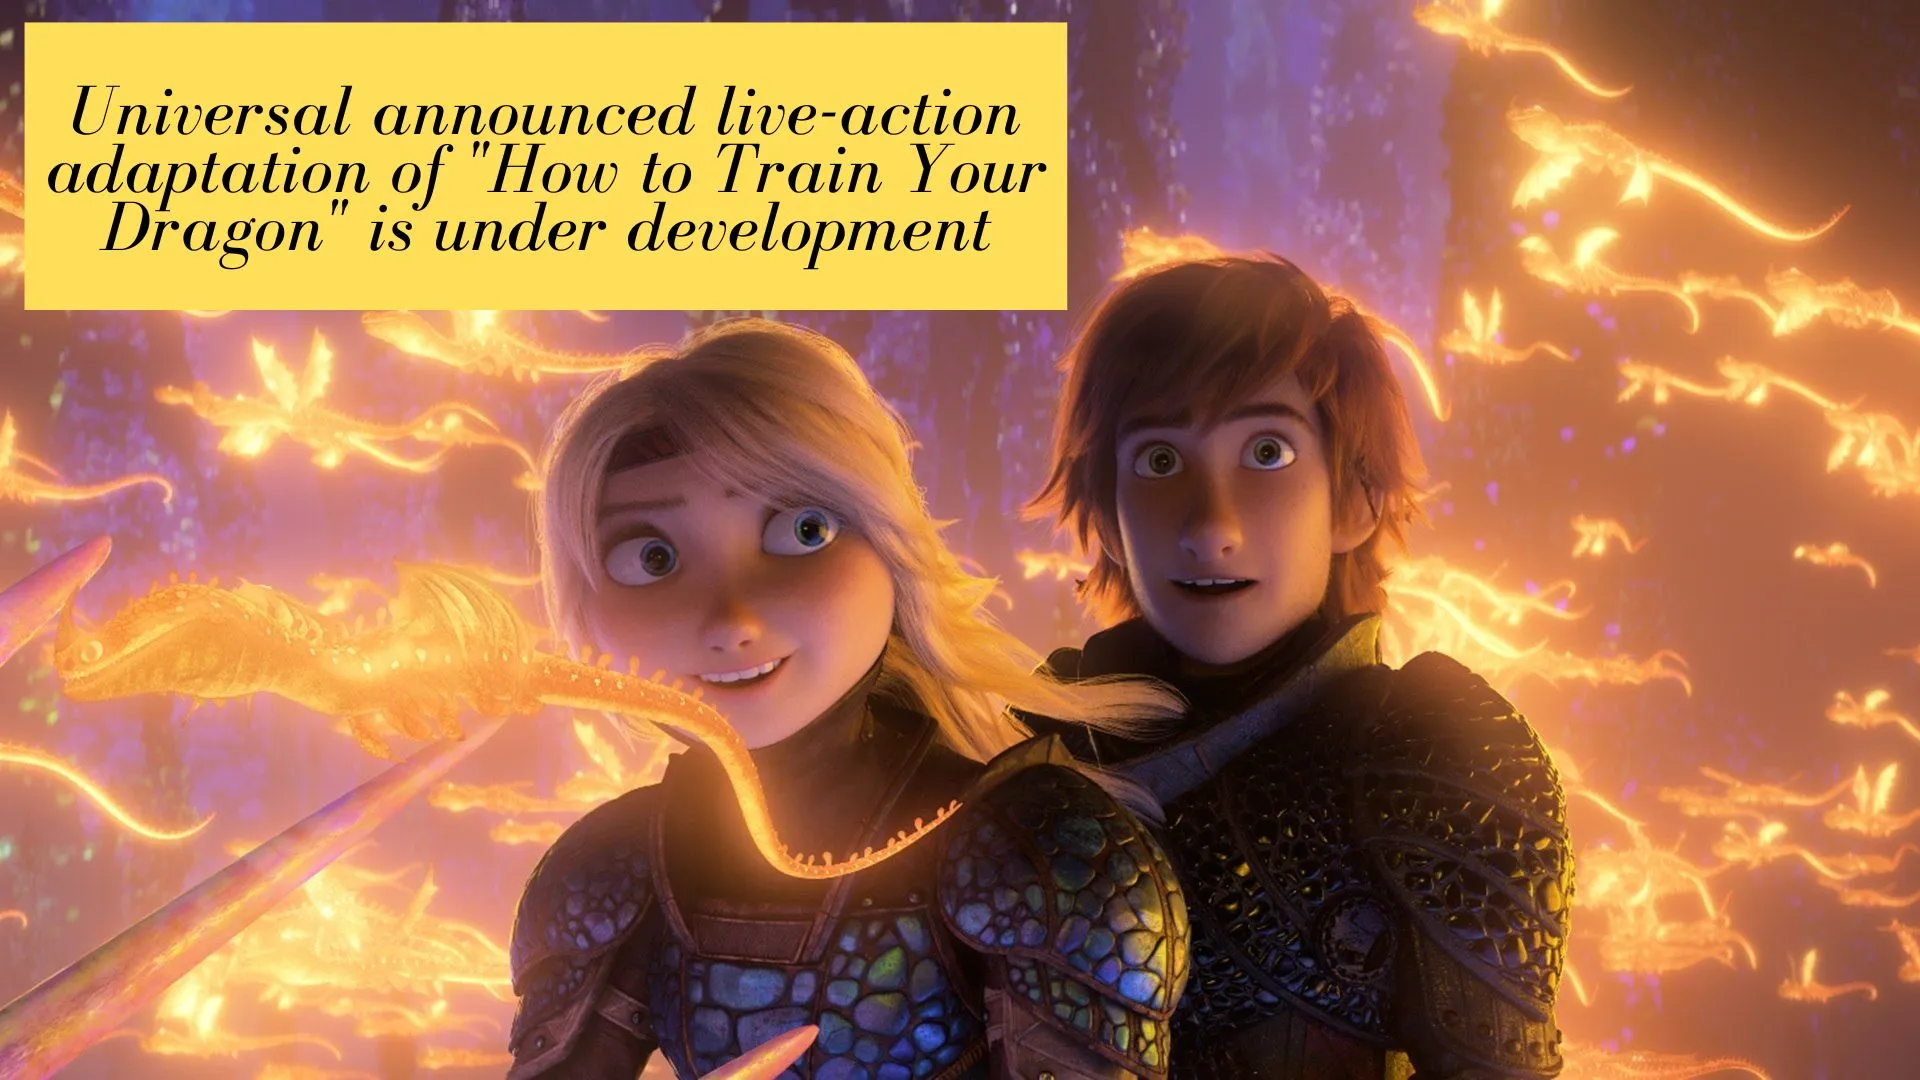 Universal announced live-action adaptation of "How to Train Your Dragon" is under development (Image credit: youtube)